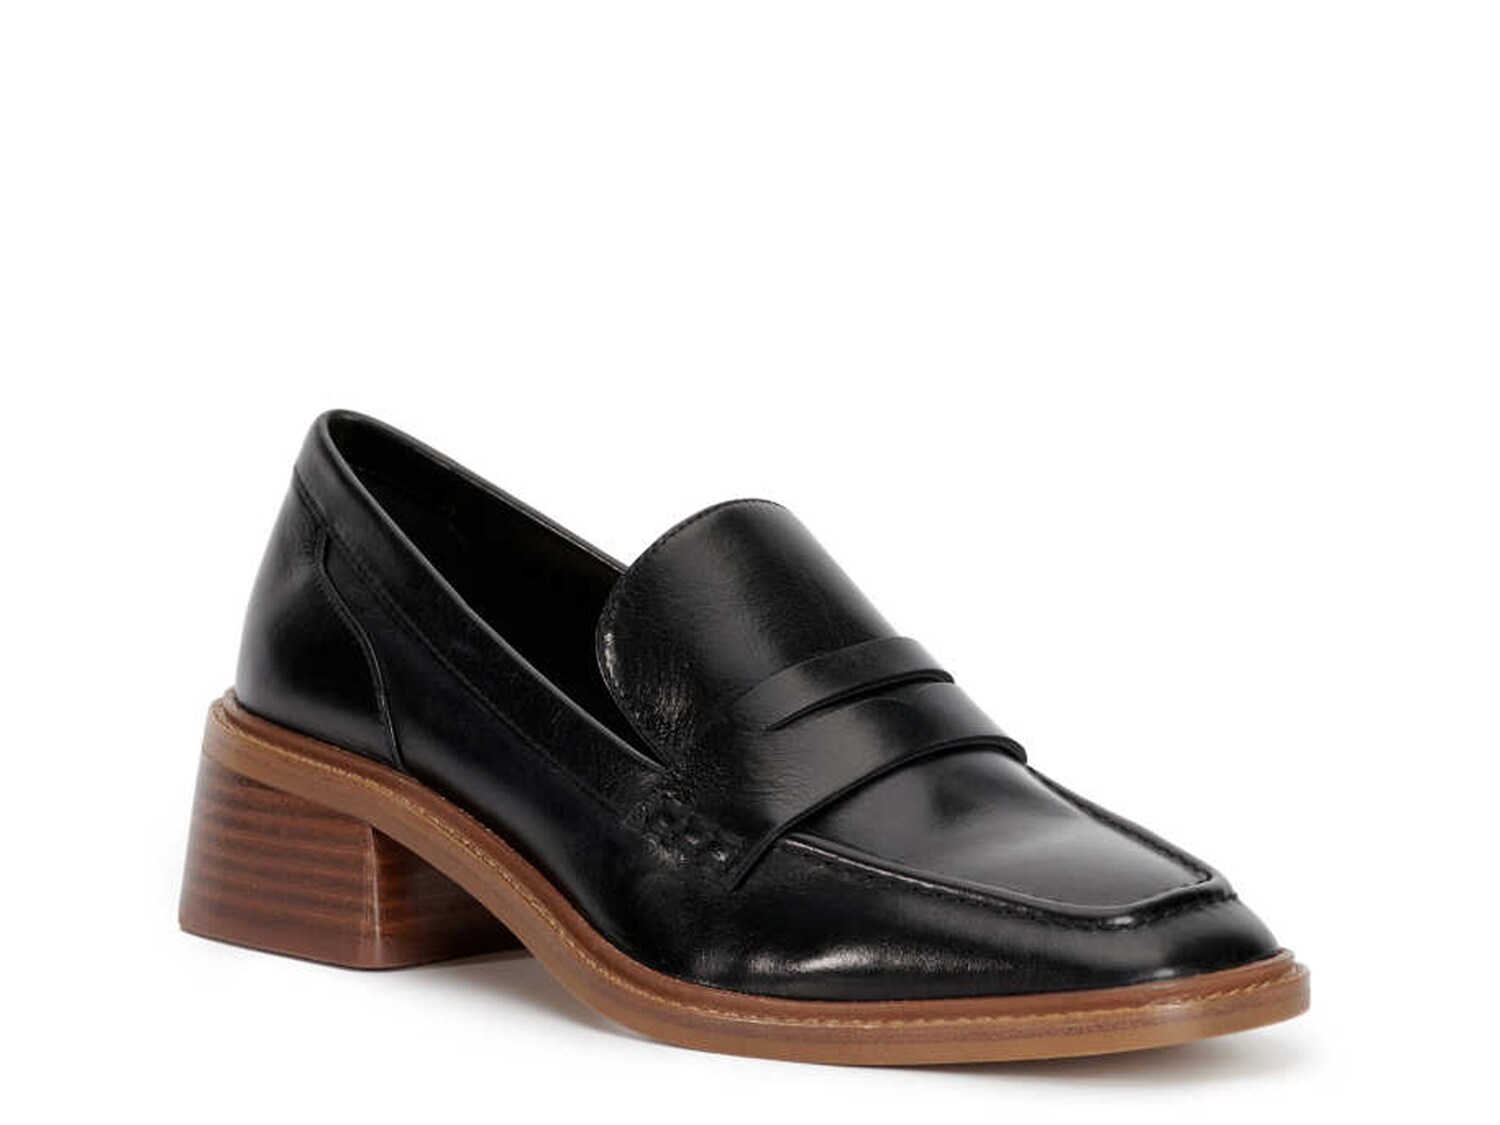 Vince Camuto Eckinti Loafer - Free Shipping | DSW